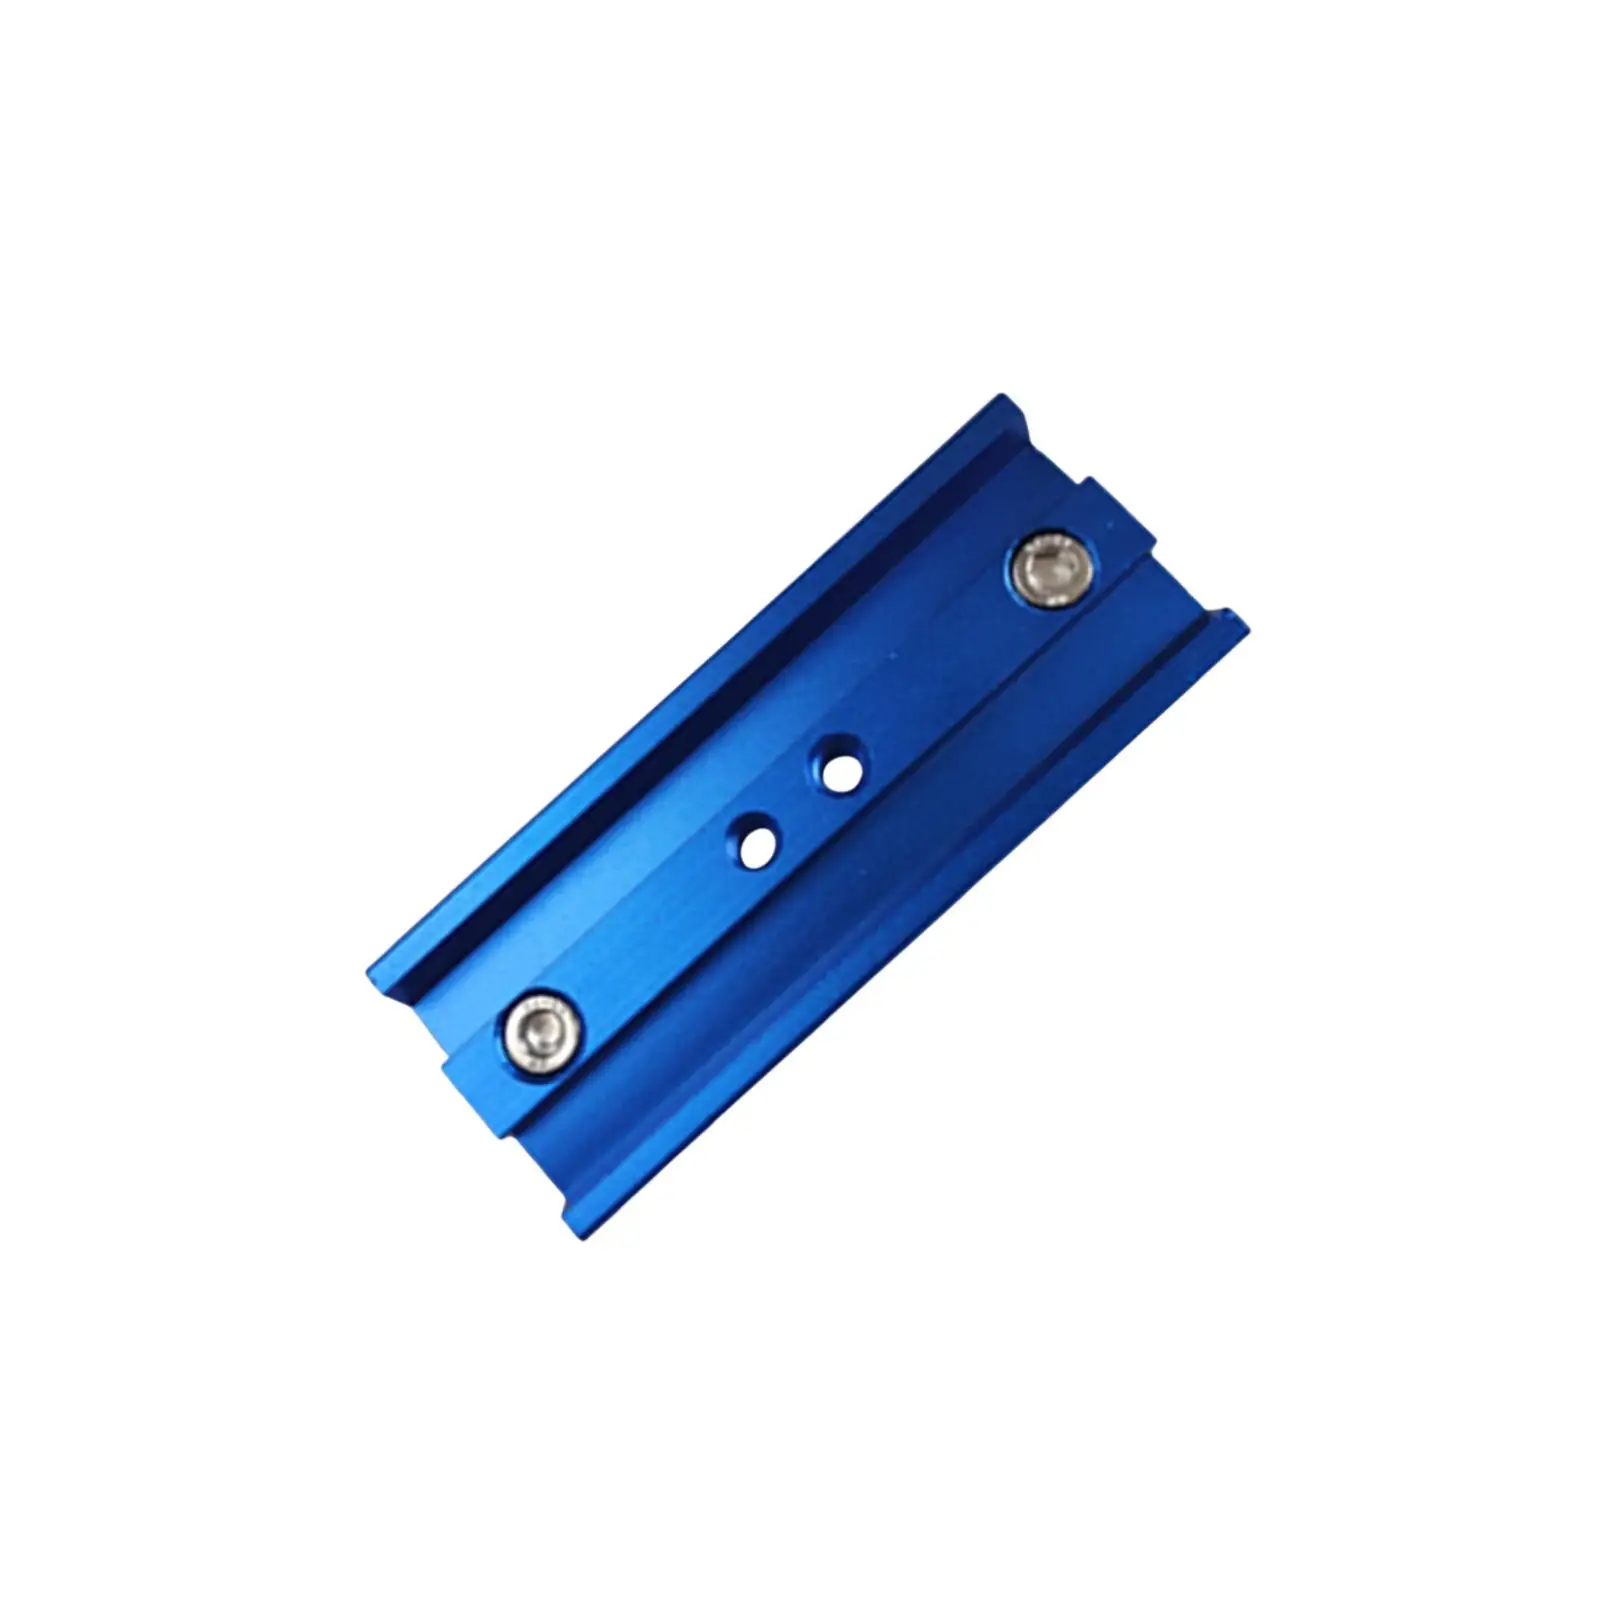 Mounting Plate 108mm Good Performance Easily Install Sturdy Bracket